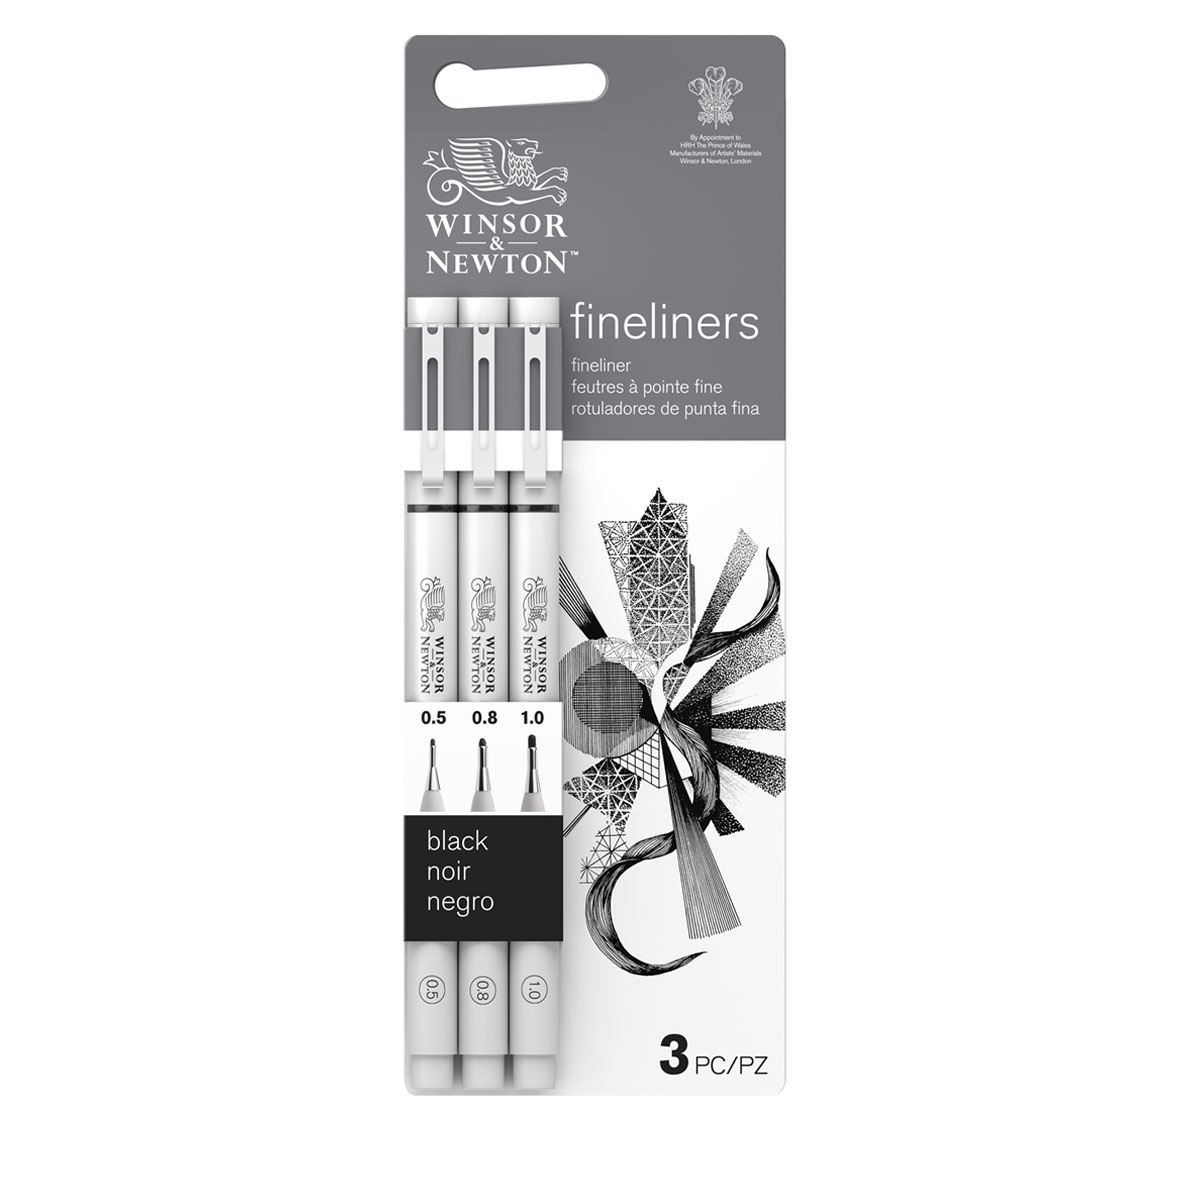 School Smart Non-Toxic Quick-drying Water Resistant Permanent Marker, 1.0 mm Fine Tip, Black, Pack of 48